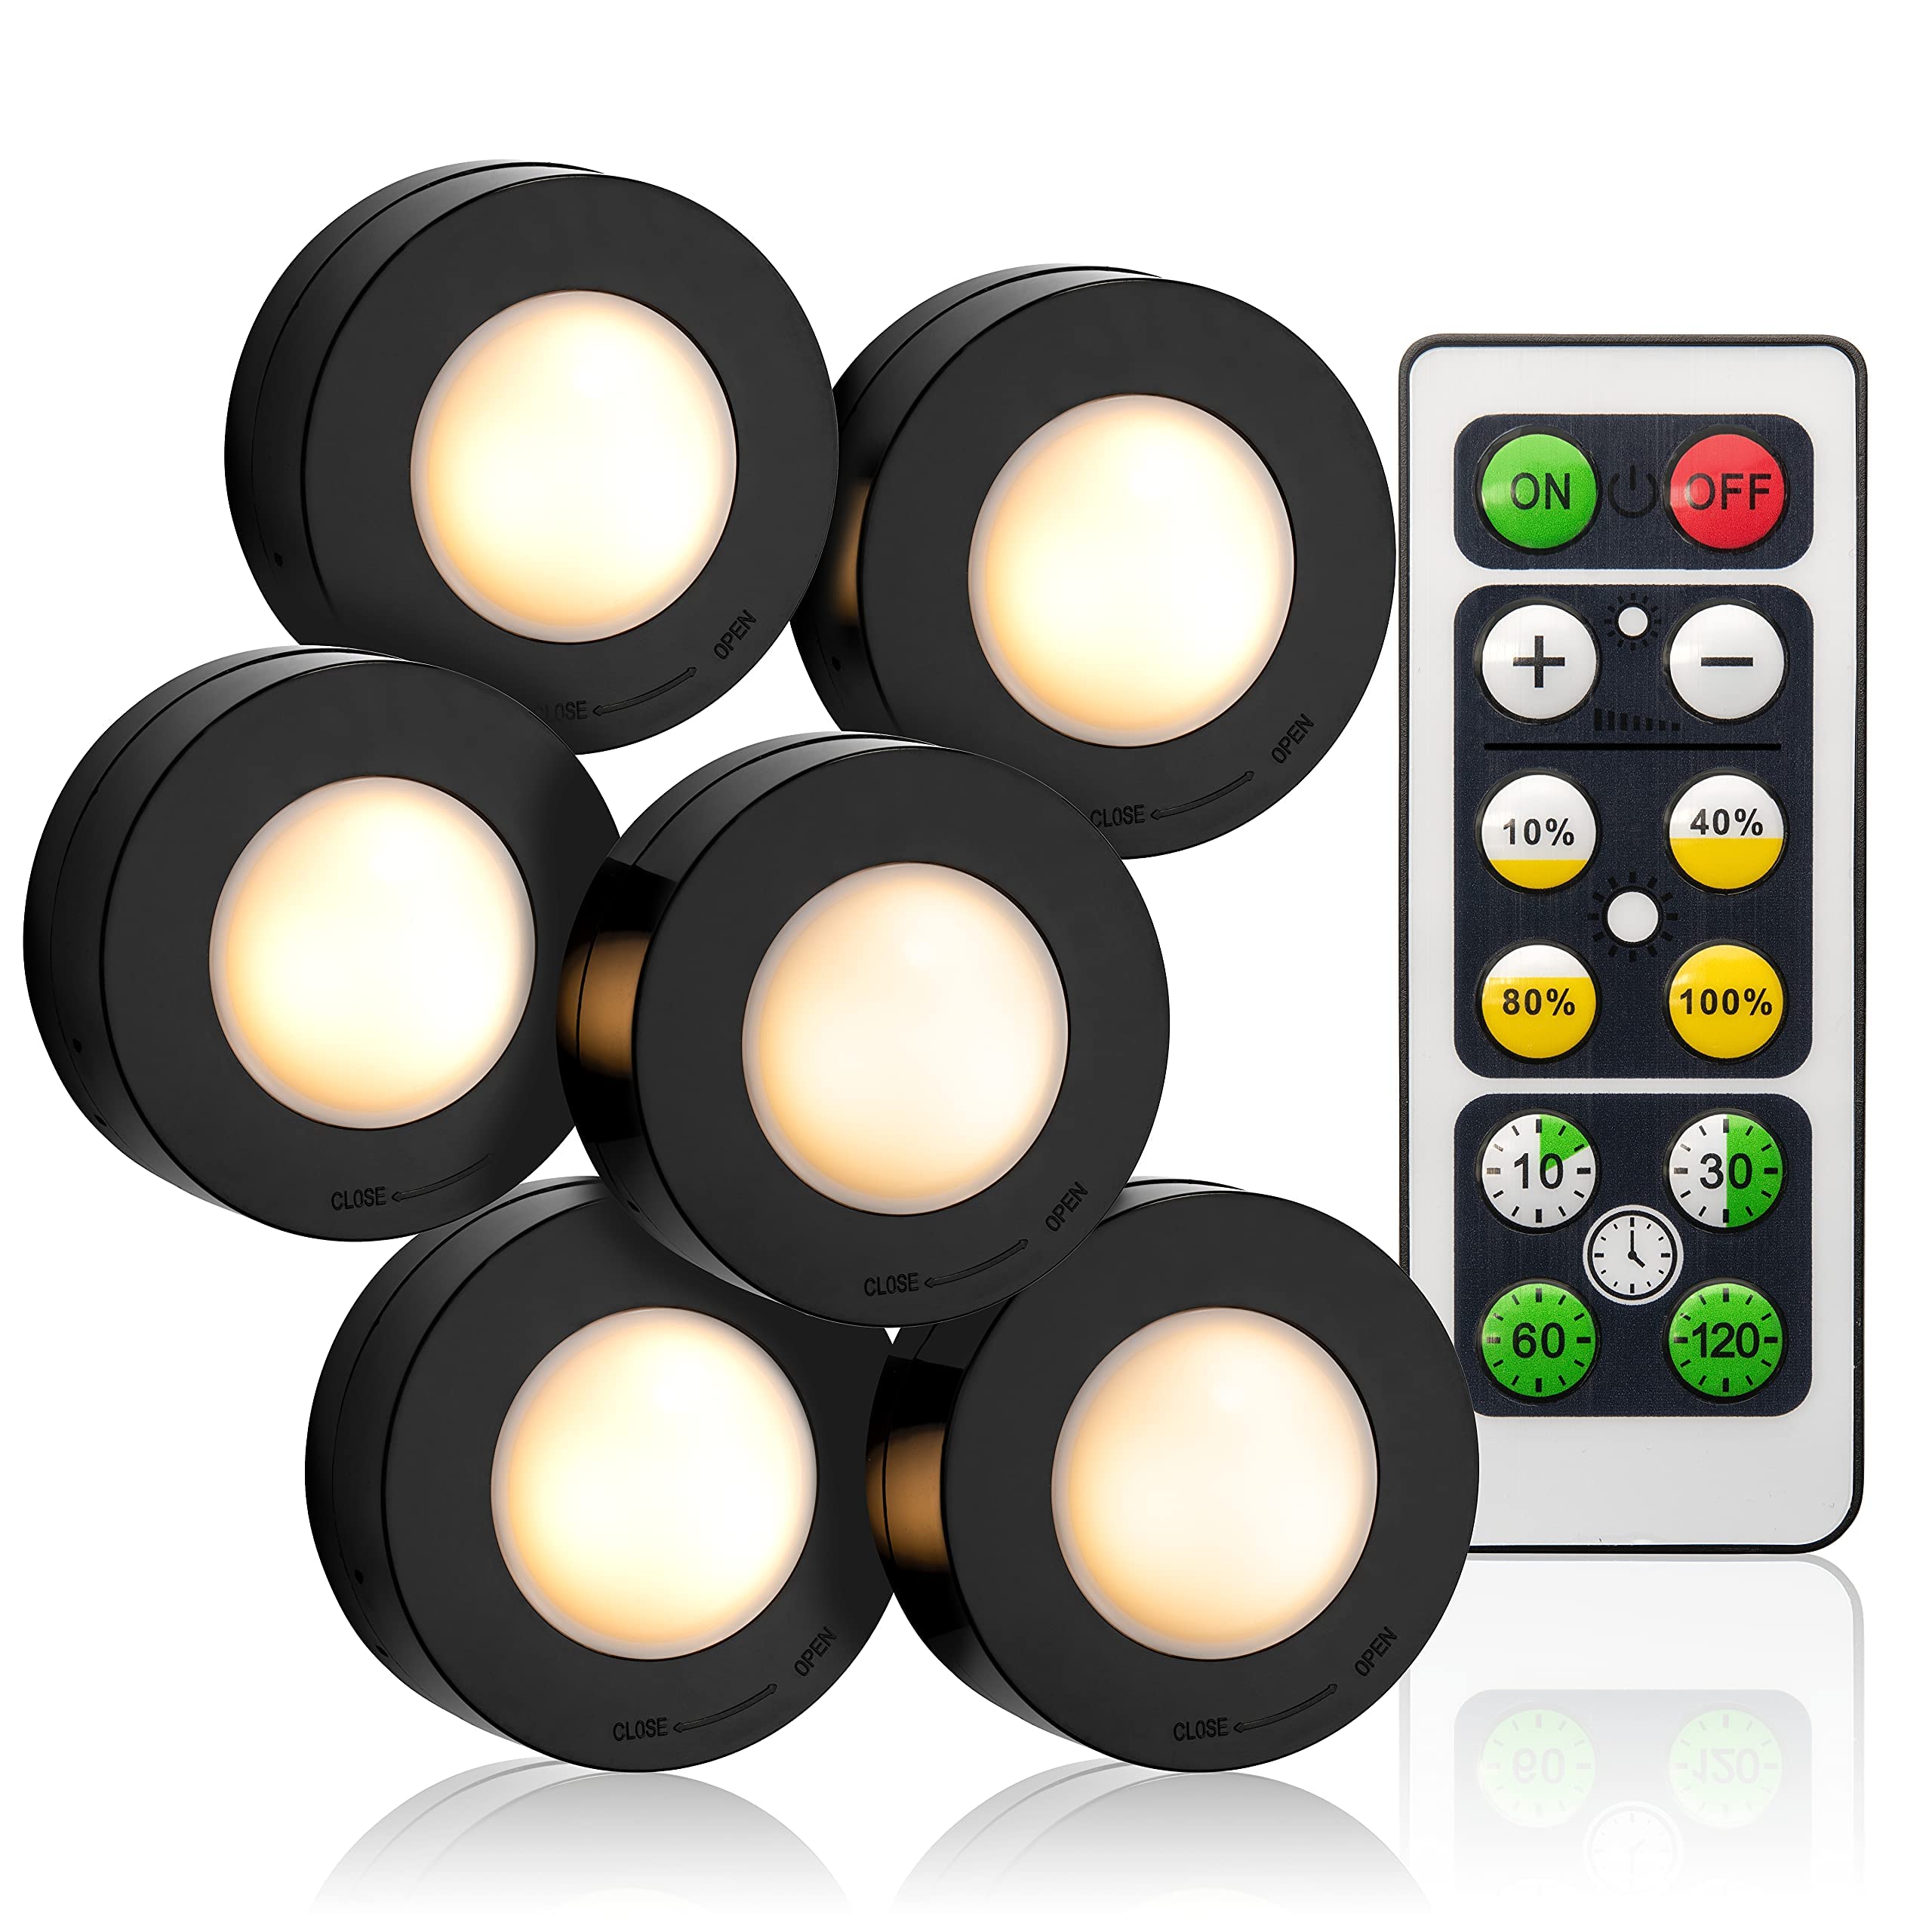 Under Cabinet Lighting (Black) Set of 6 - Wireless Remote Controlled Dimmable Auto-Off LED - 3000K Warm White Battery Operated Lights - Low Profile Puck - Low Power Consumption